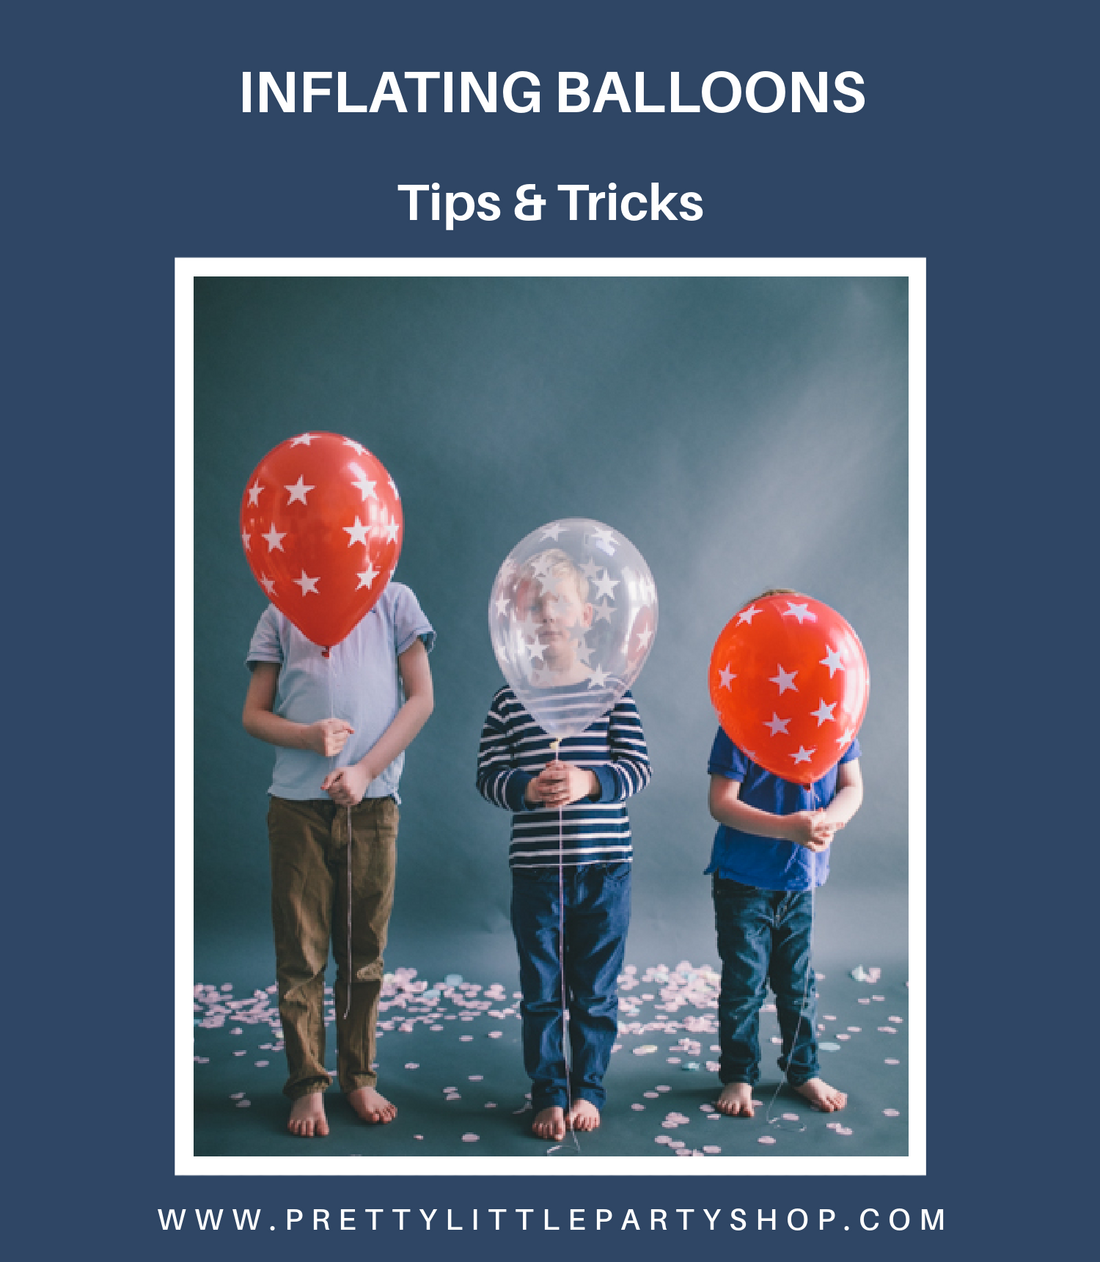 How to Blow Up Balloons - Hints & Tips for Inflating Balloons UK